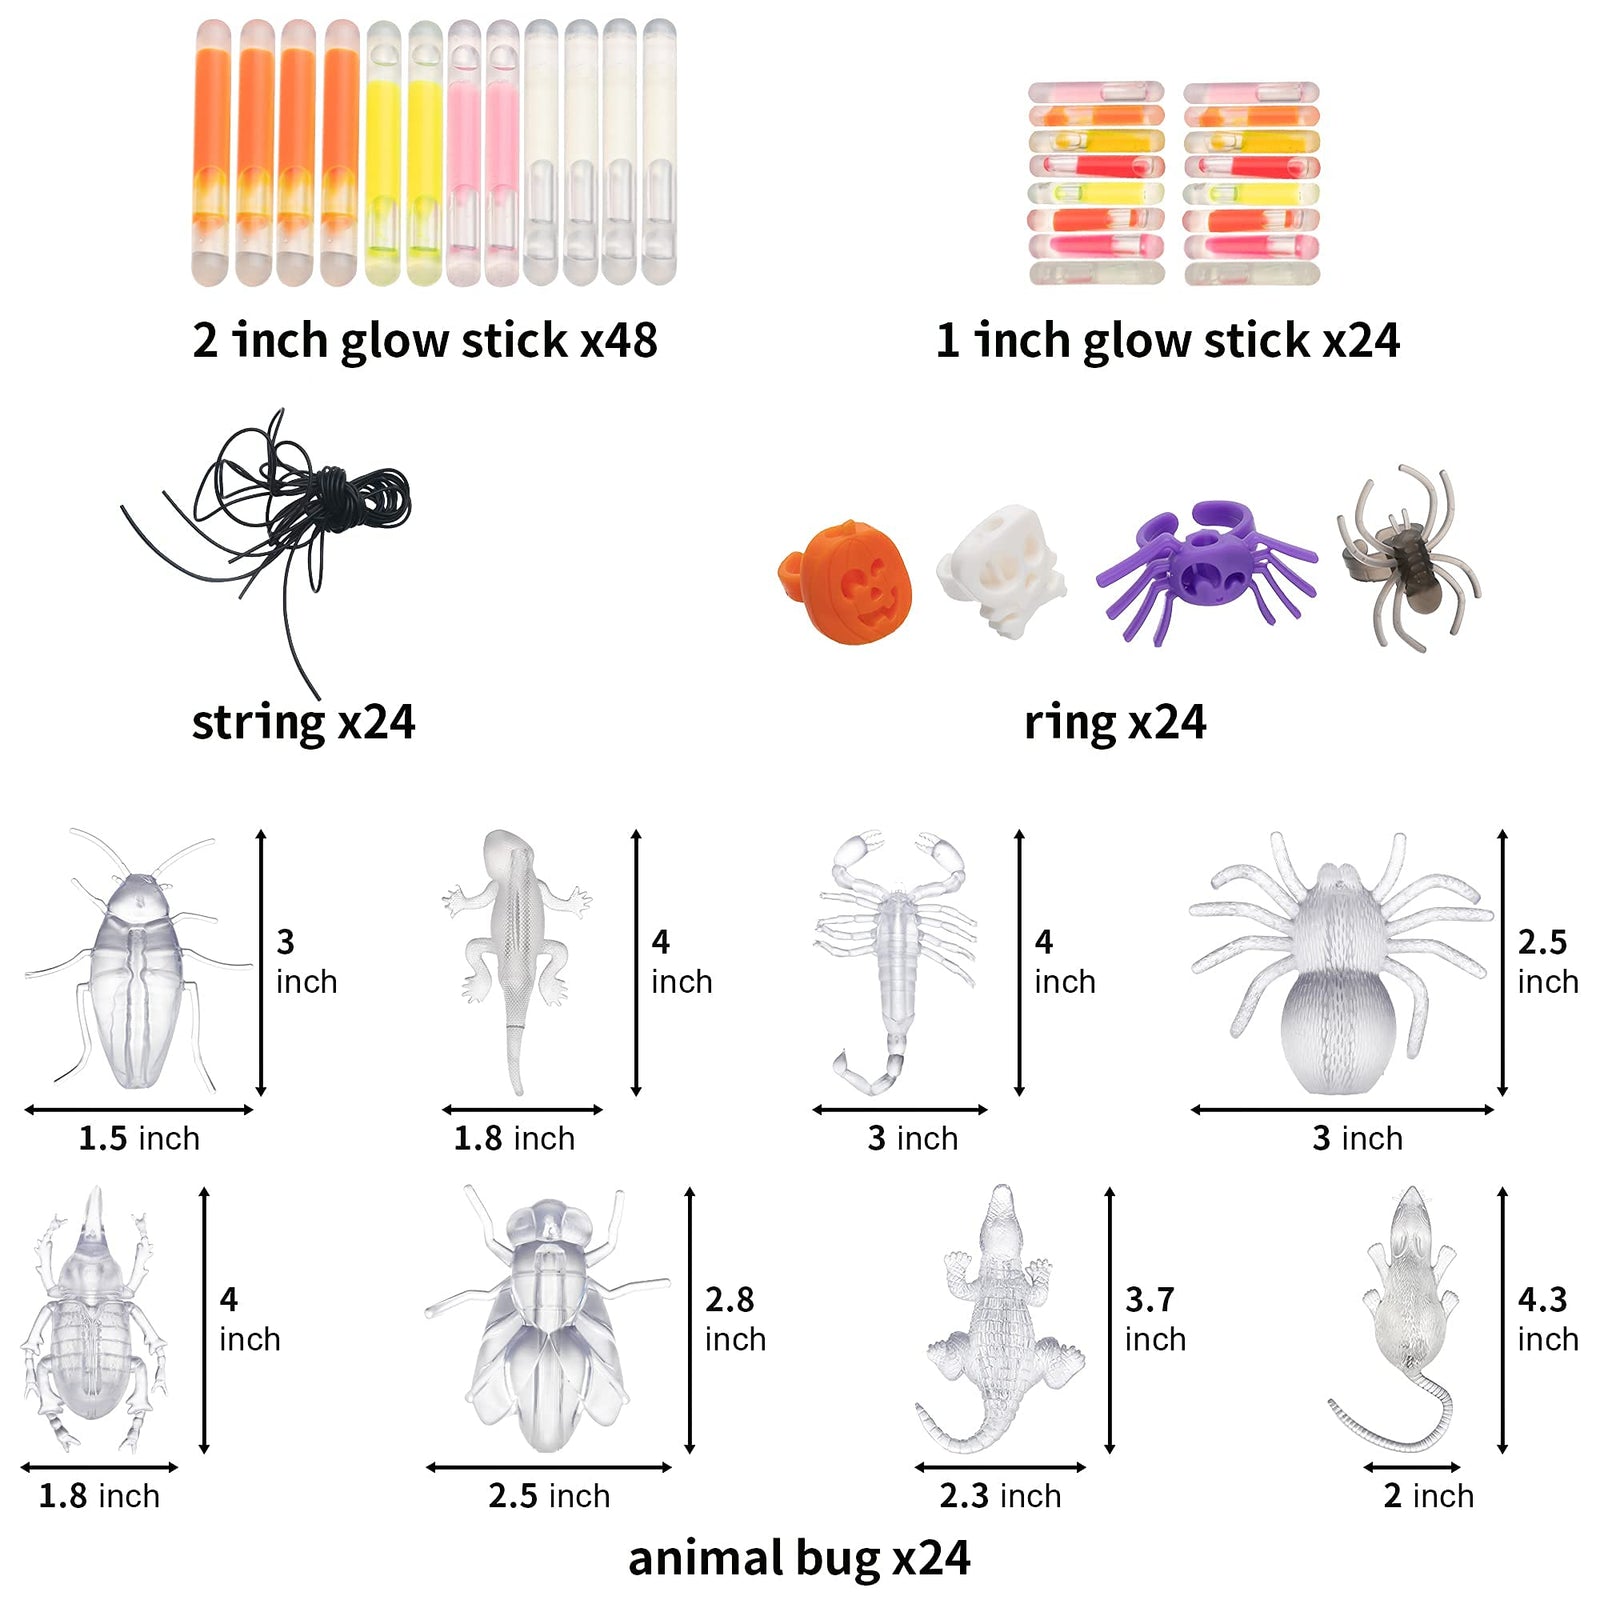 JOYIN 120 Pcs Halloween Light Up Glow Stick Bugs Set with 24 Animals, 24 Rings in 4 Styles, 24 Strings and 48 Glow Sticks for Halloween Trick or Treat Glow in the Dark Party Favors, Goodie Bag Fillers